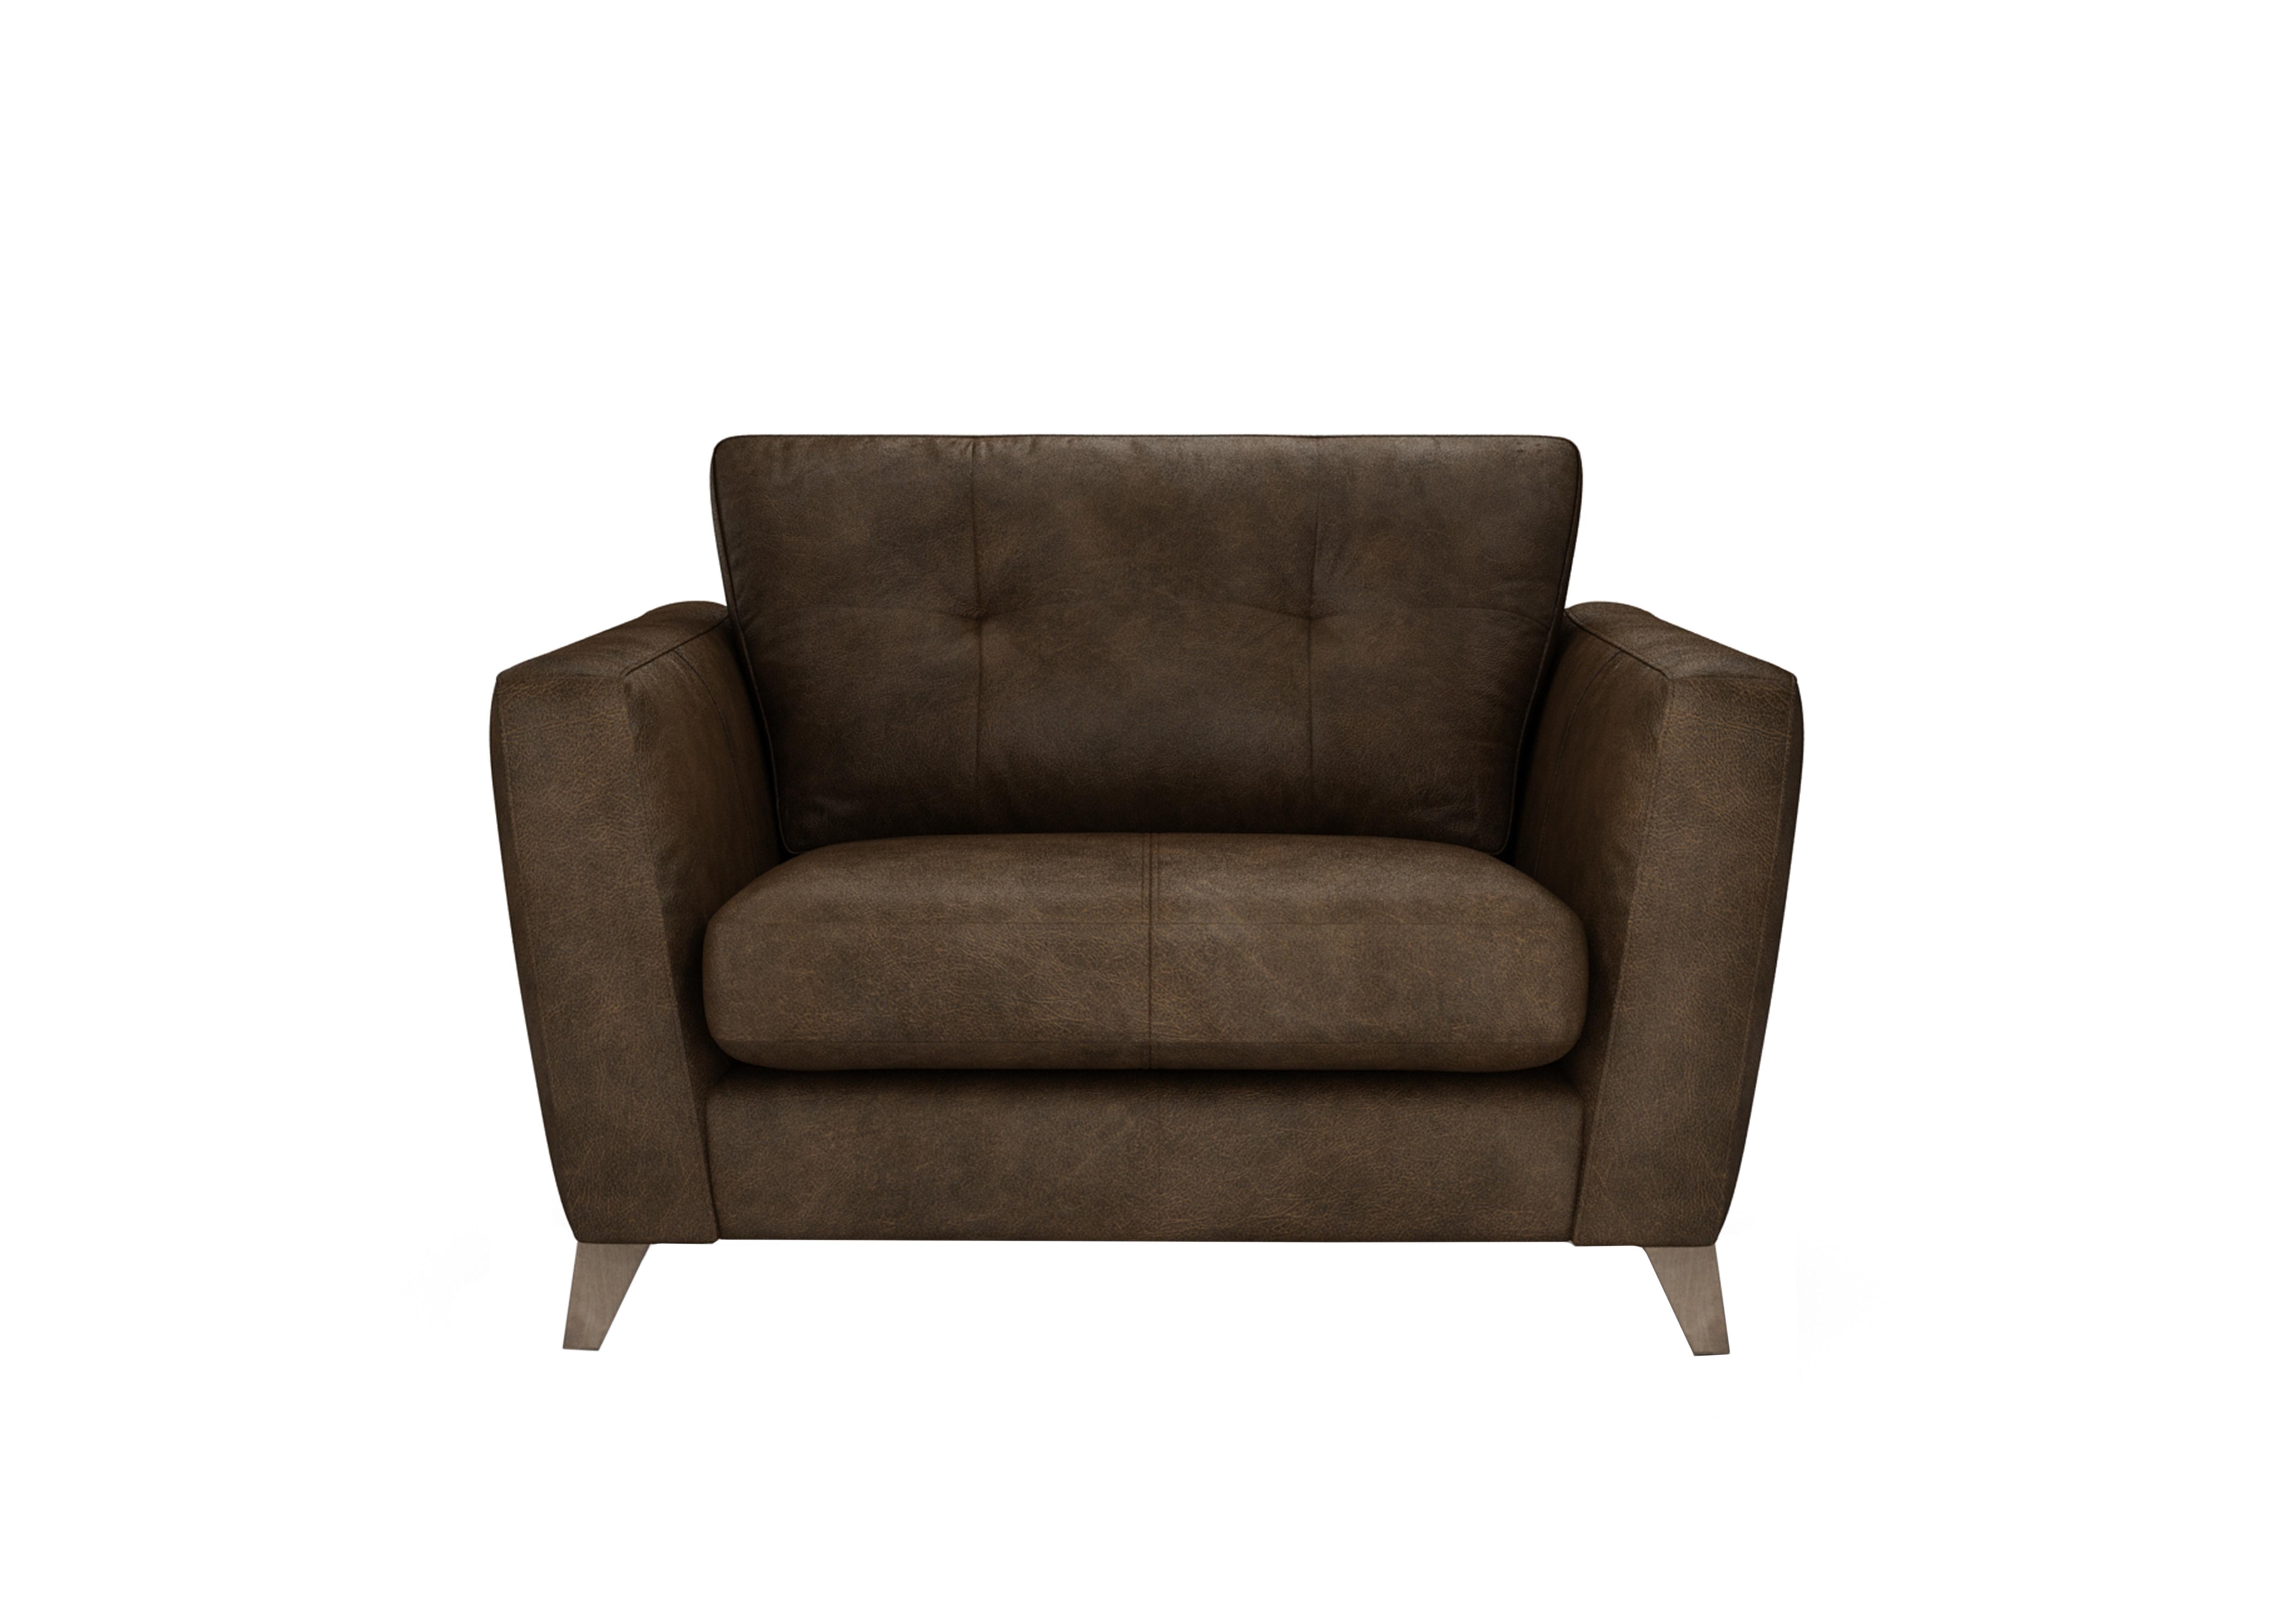 Hermione Leather Snuggler in Bou192 Bourbon Wo Ft on Furniture Village